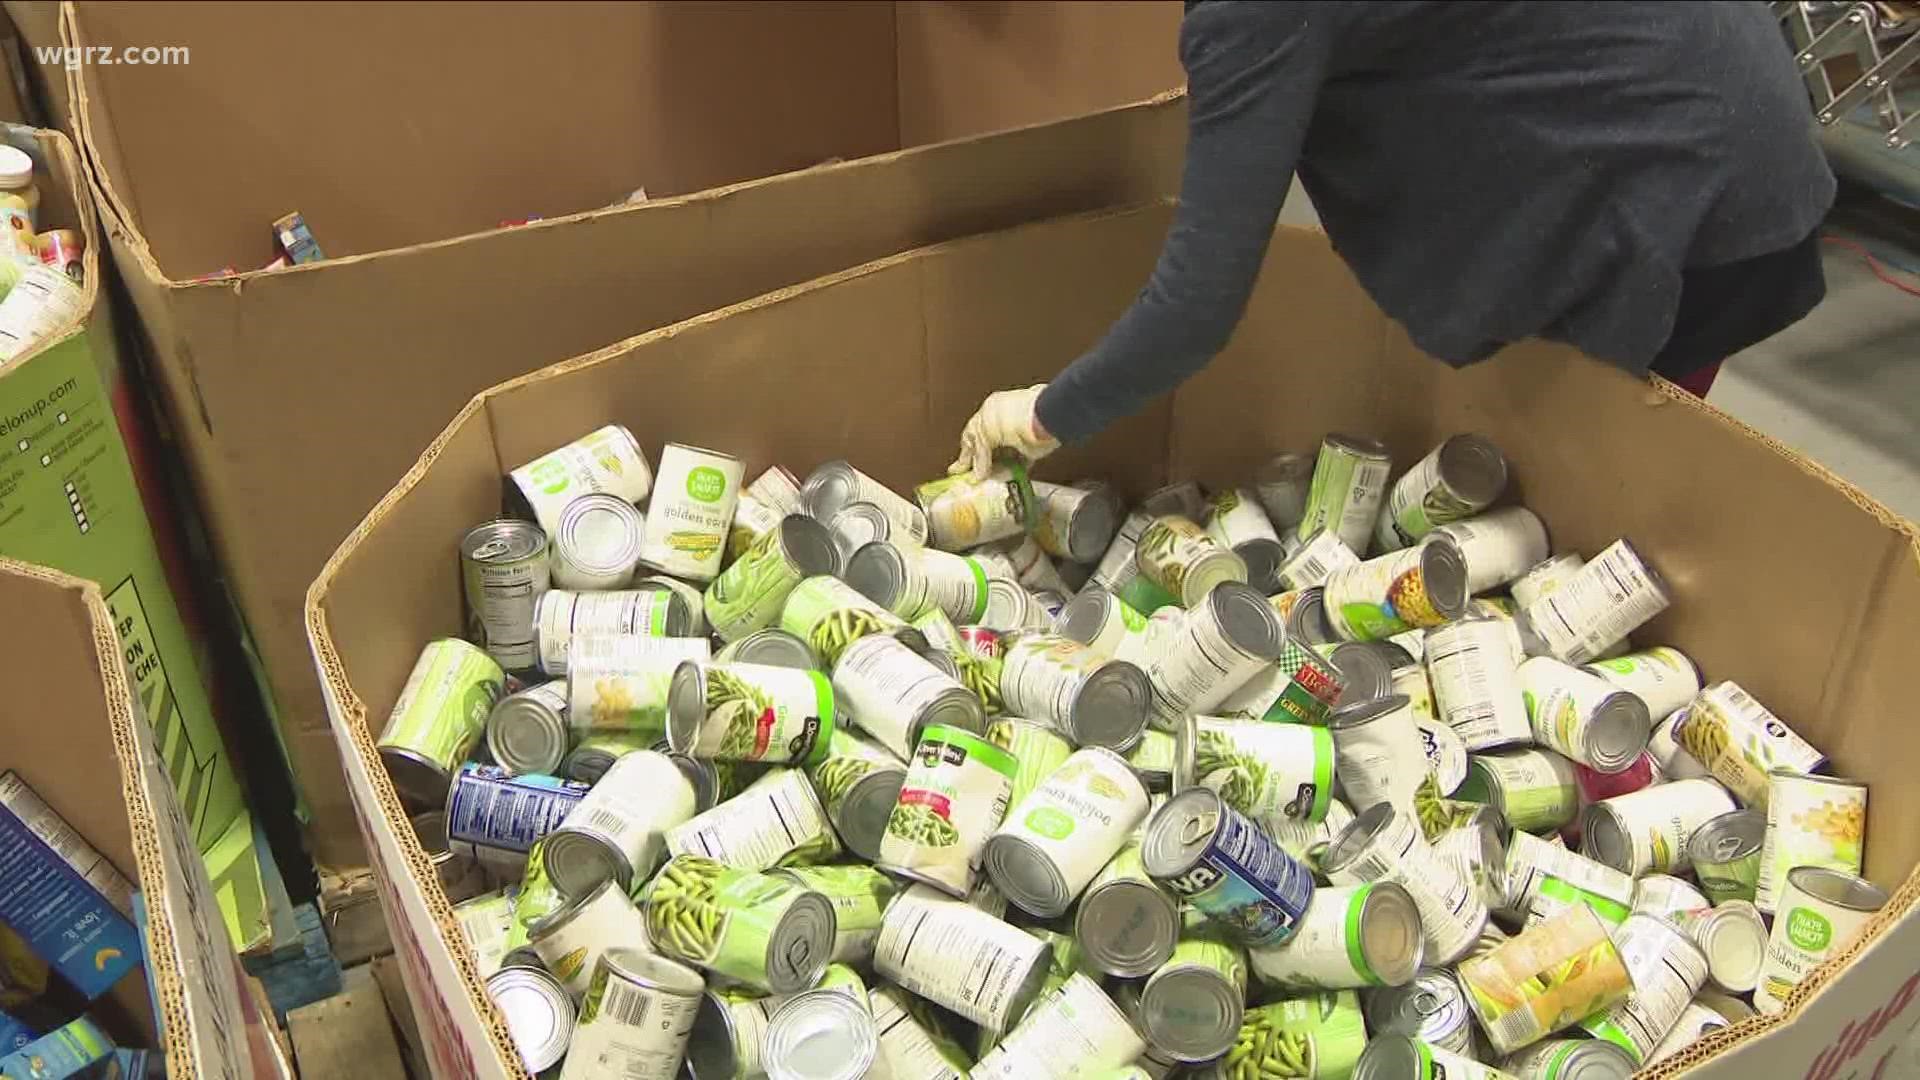 Feedmore WNY, YMCA team up to fight hunger